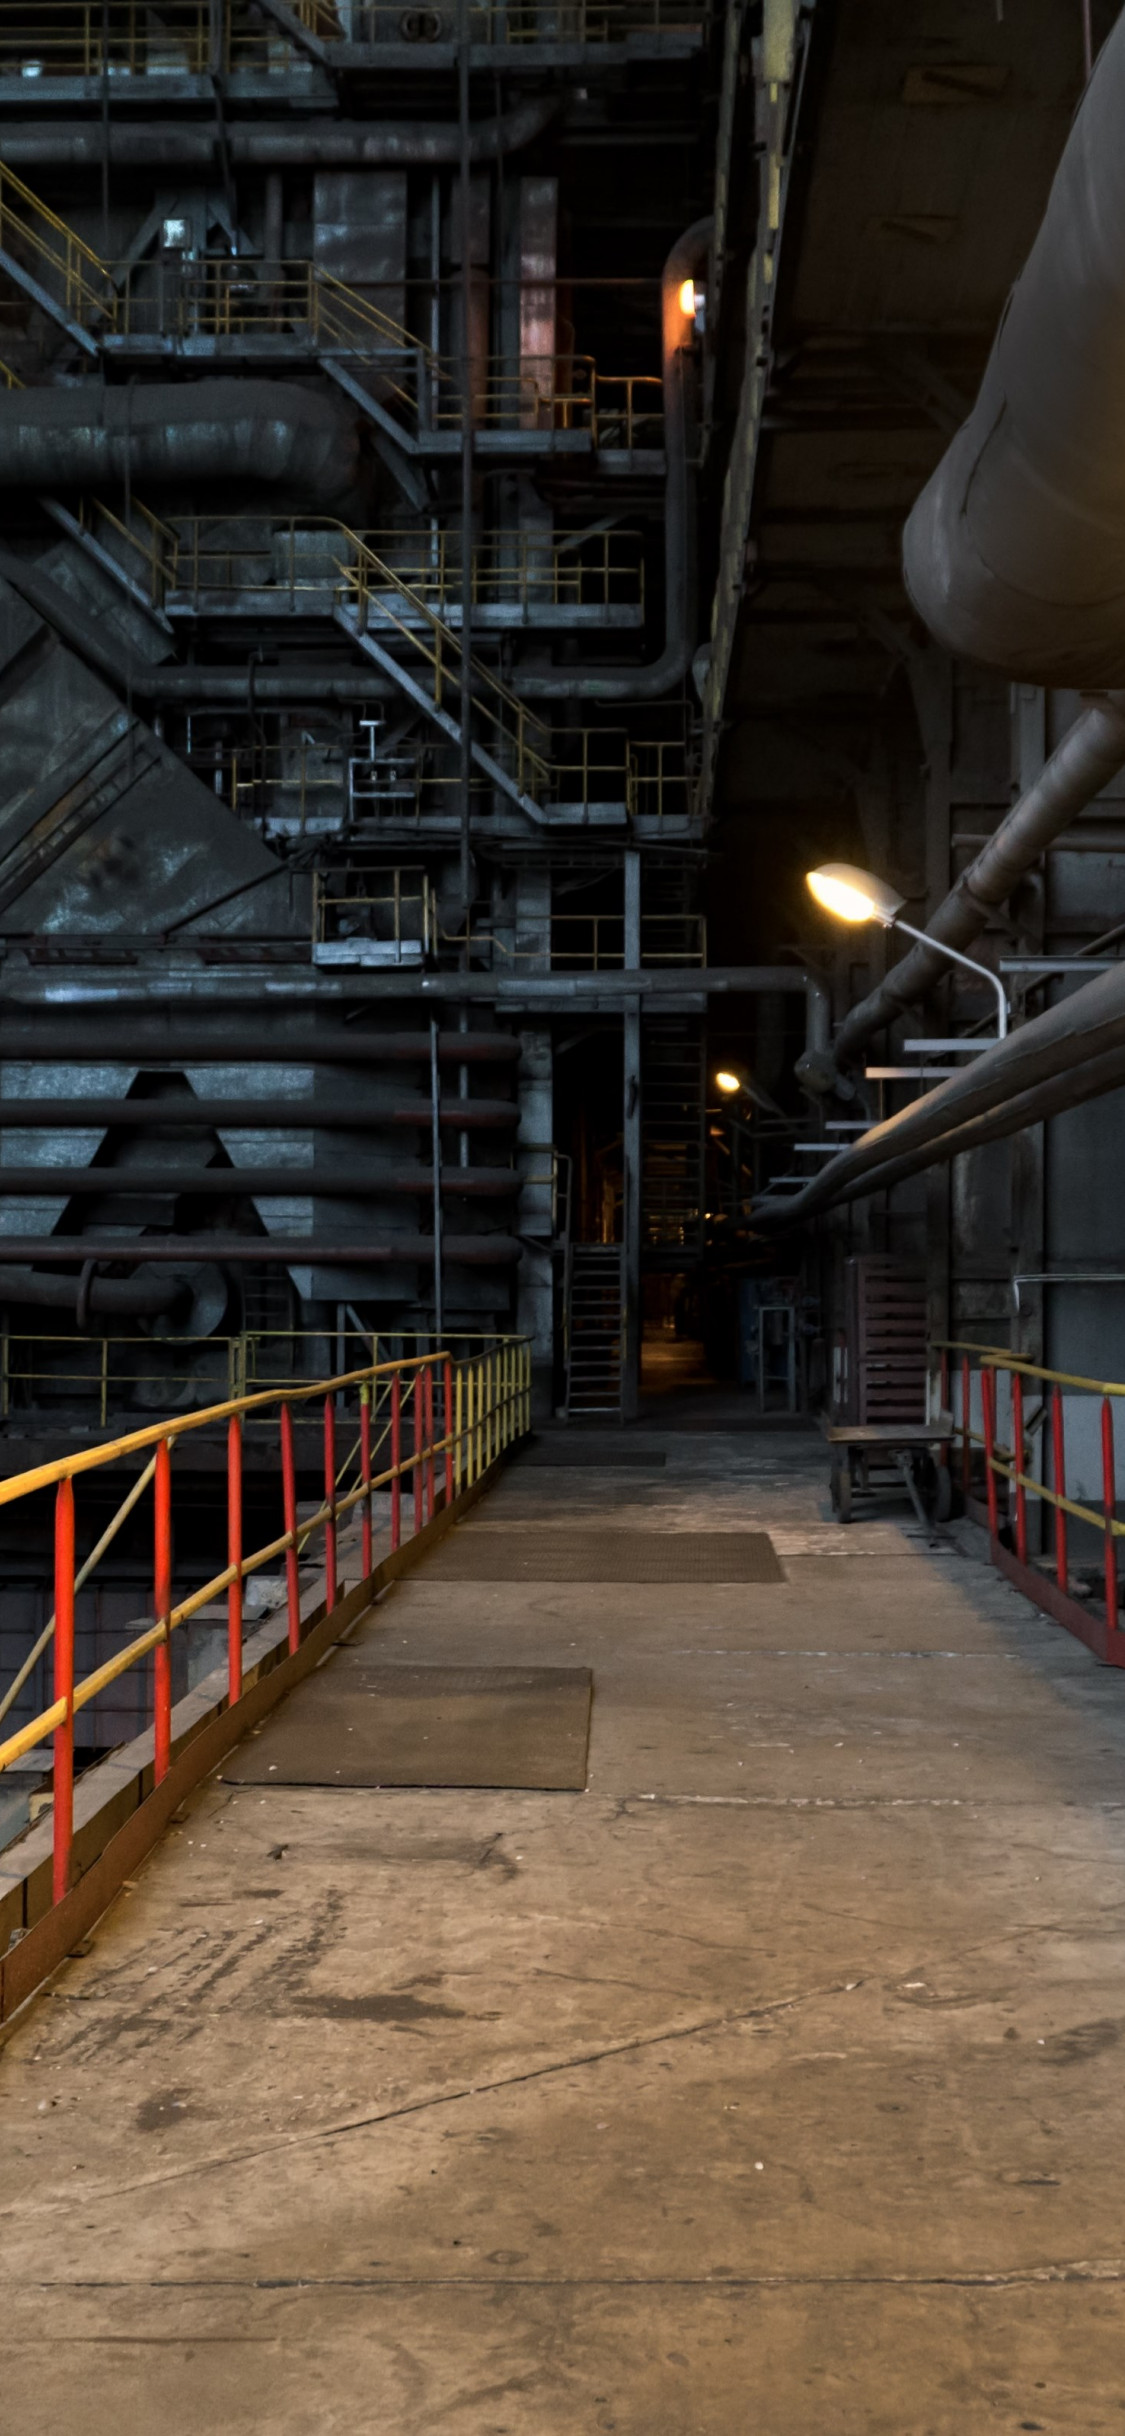 The inside of a power station wallpaper 1125x2436